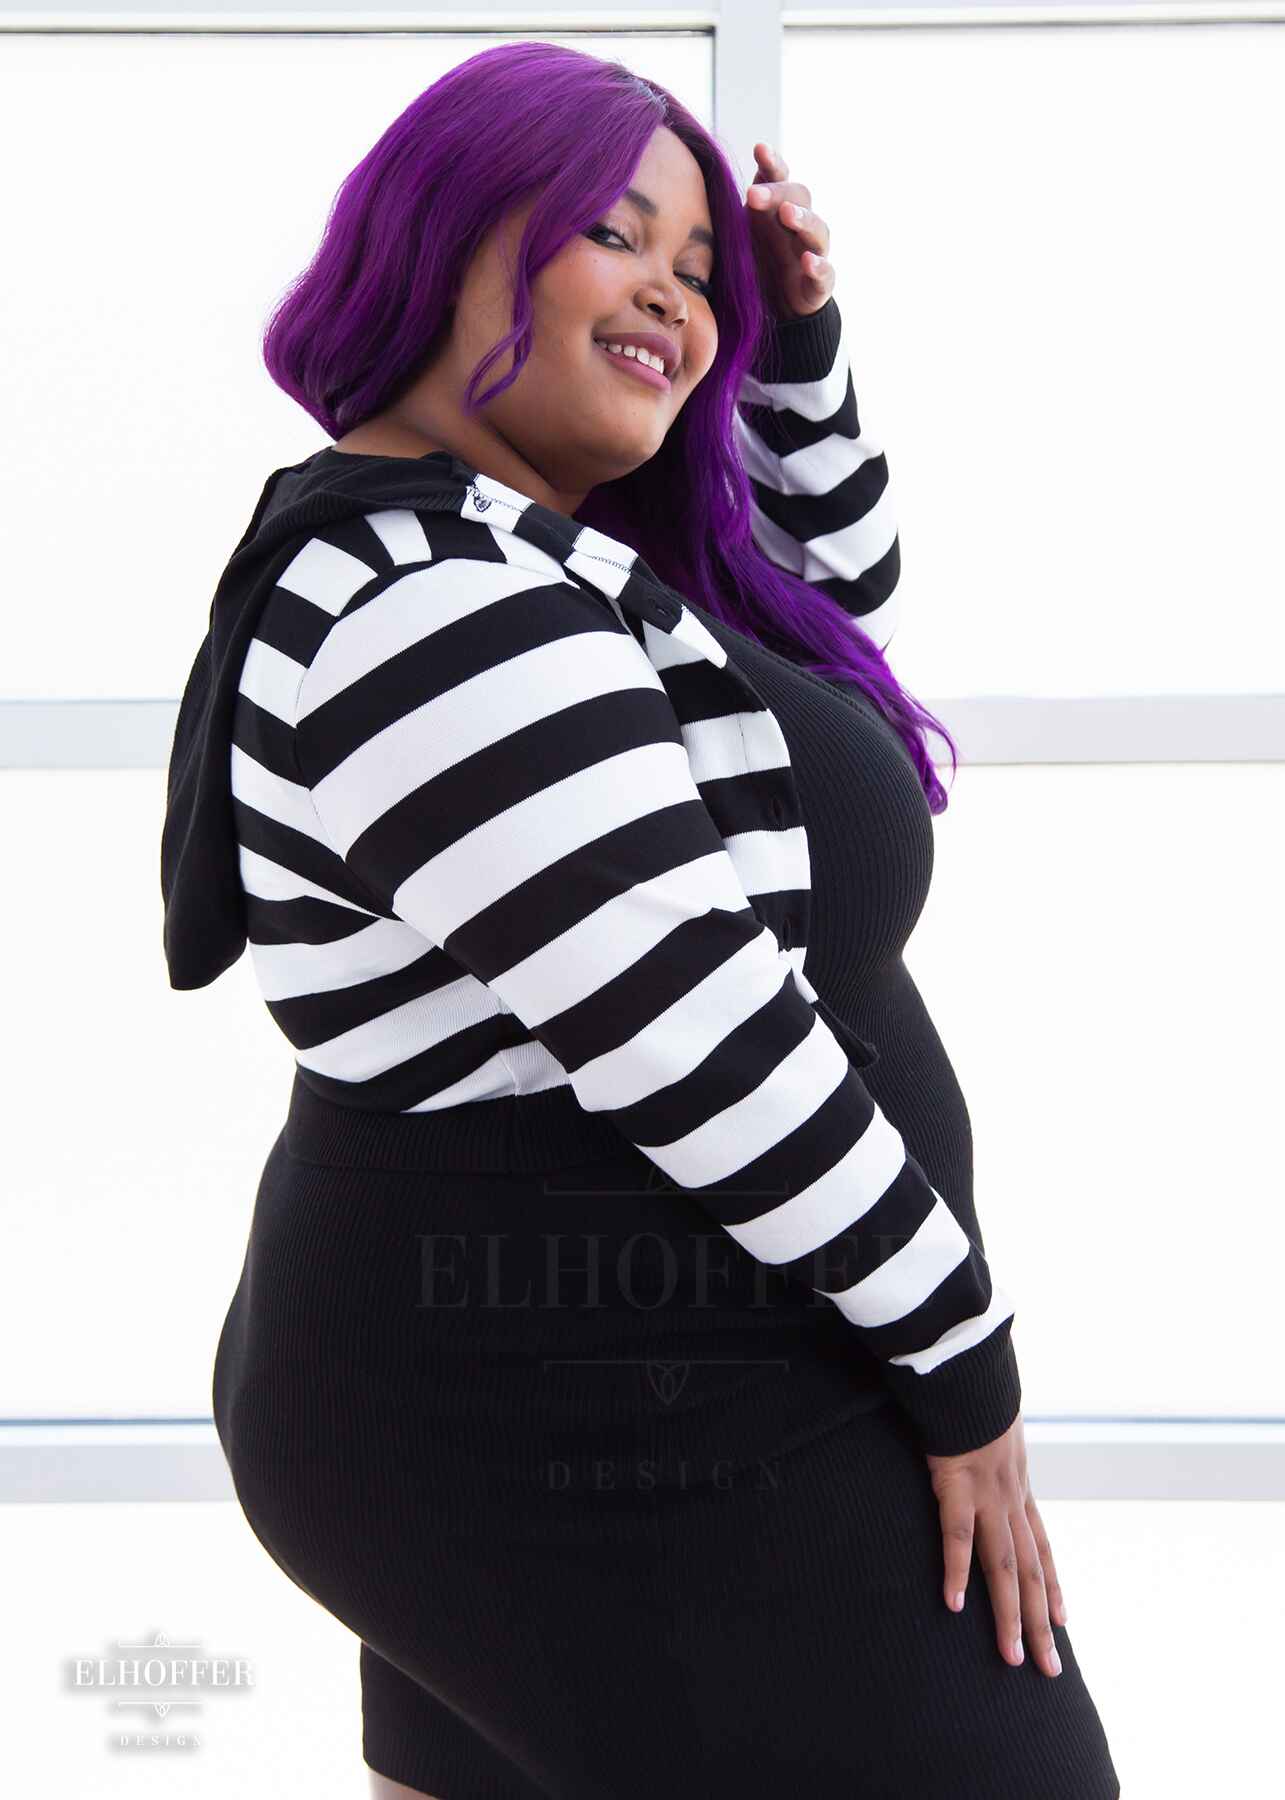 A side view of Jade, a medium dark skinned 2xl model with long wavy purple hair, smiling whlie wearing a cropped knit button up cardigan with long sleeves, black and white horizontal stripes, and a black hood.